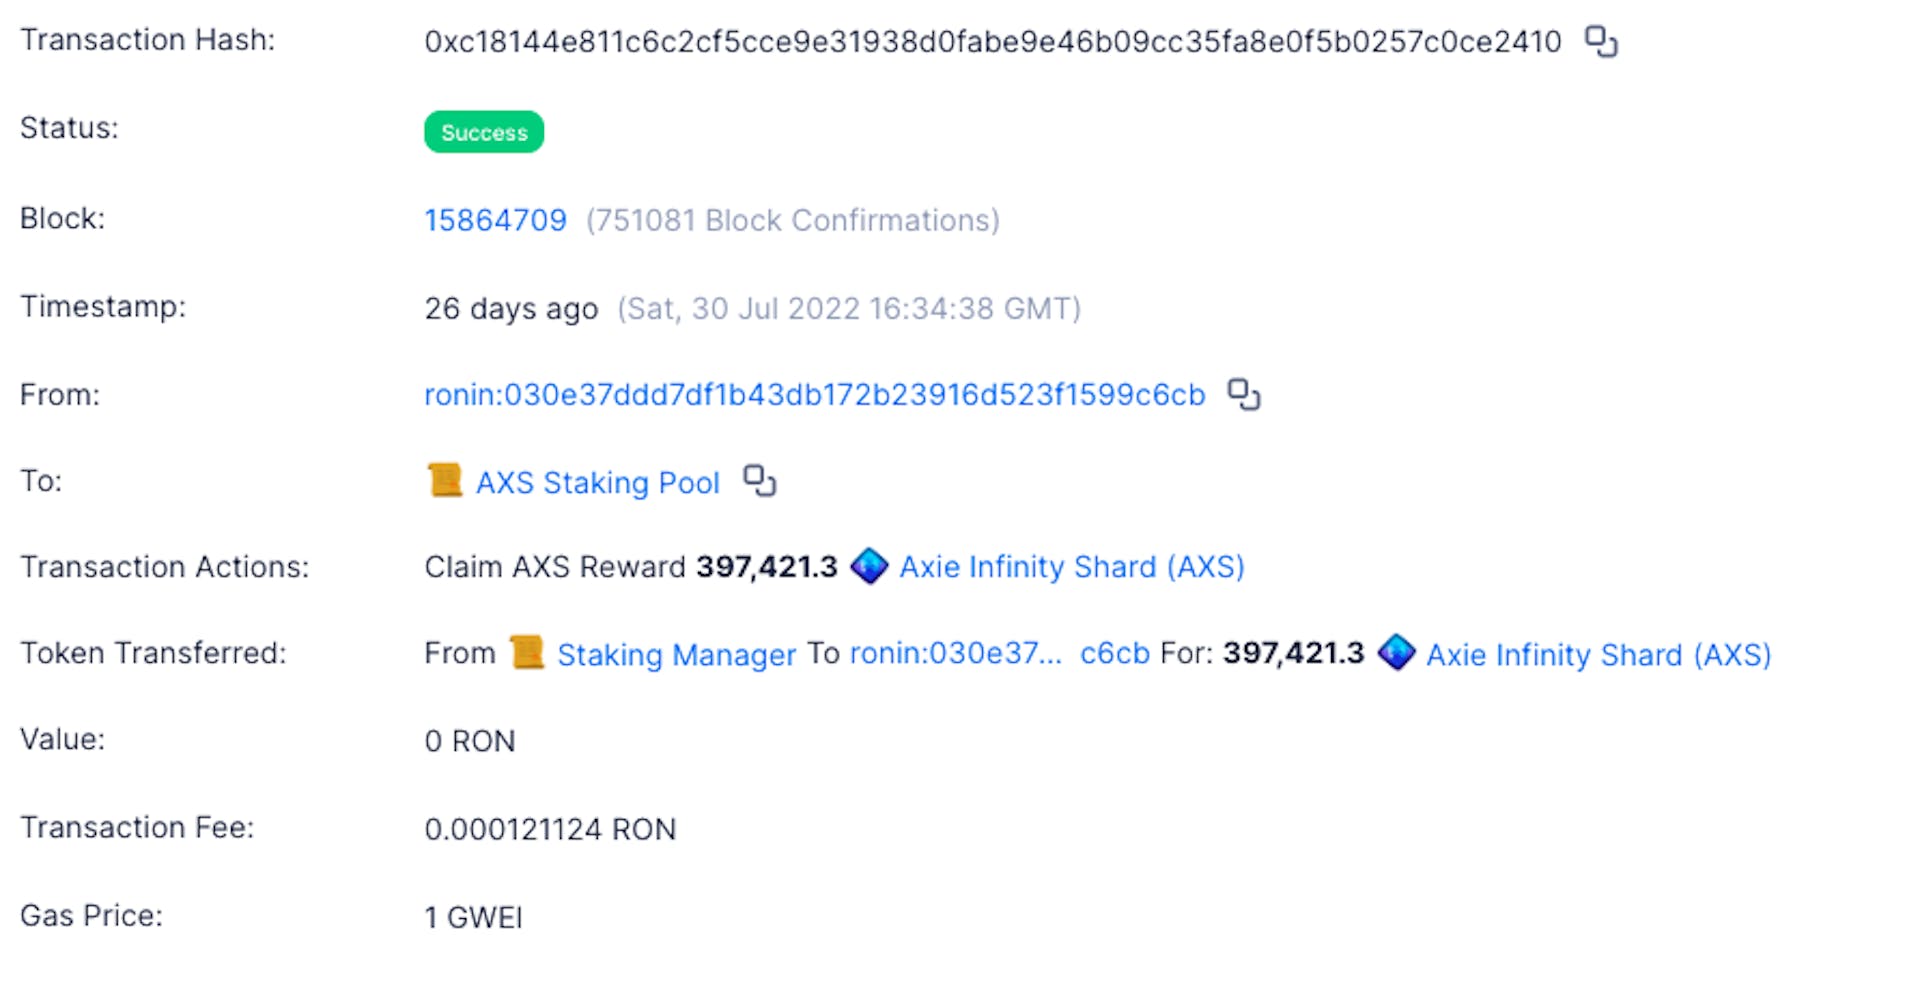 This transaction from July 30th appears to show Whale AX claiming 397,421.3 AXS rewards, today worth approximately $5,846,067.32.